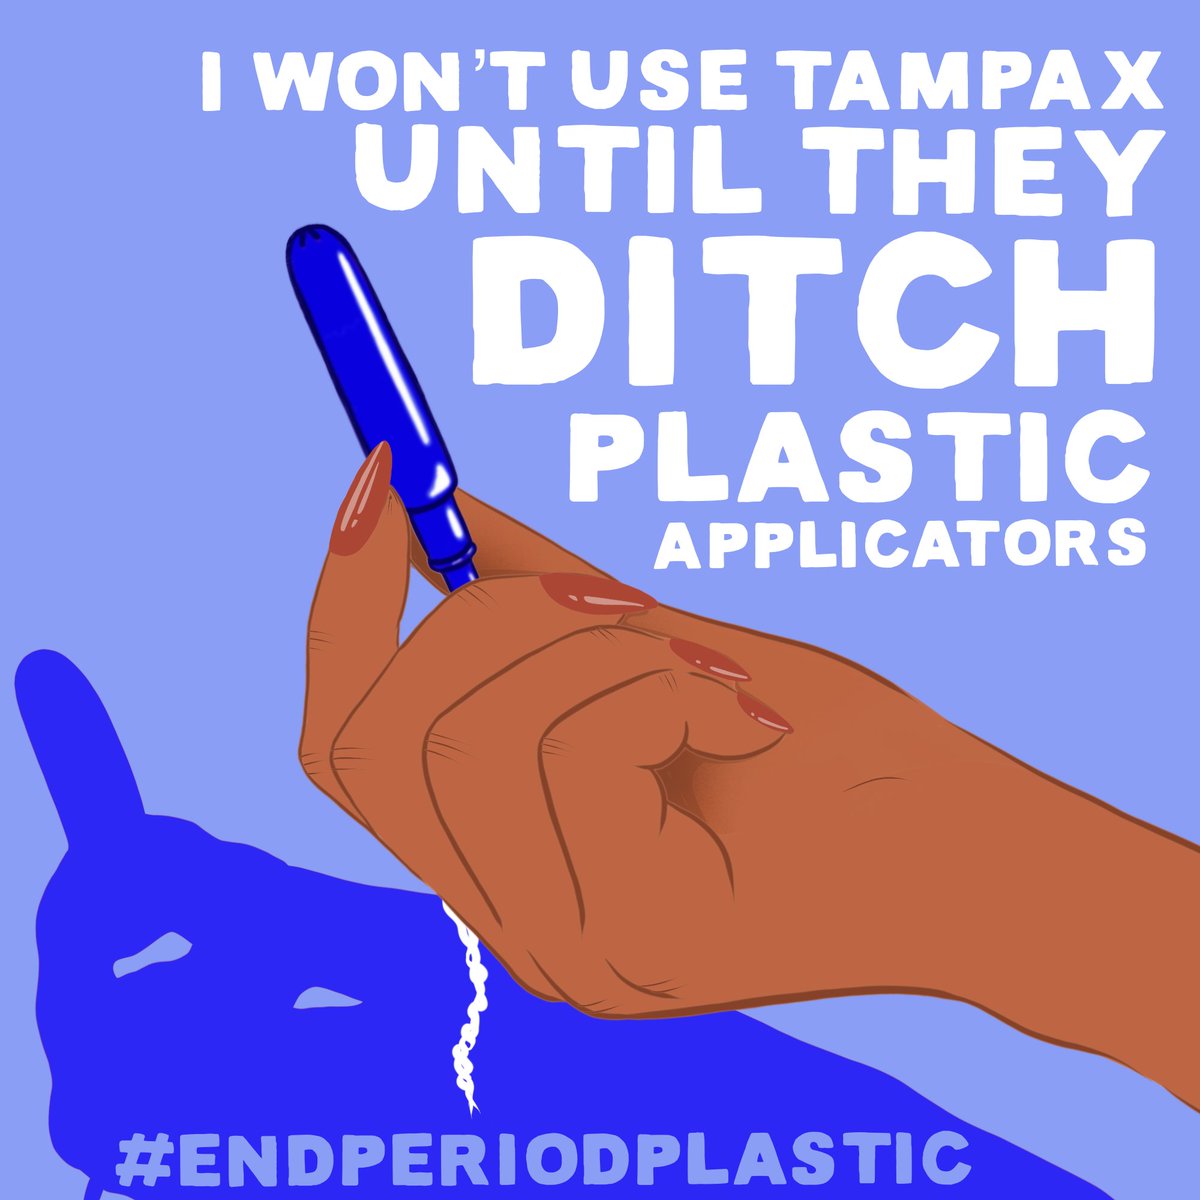 For every 100 metres of shorelines, there are 20 washed up tampons or applicators- this is unacceptable. @Tampax @ProcterGamble please don't produce #plastic applicators- there's no need.  #plasticfreeperiods change.org/p/make-all-men… @ella_daish #sustainableperiods